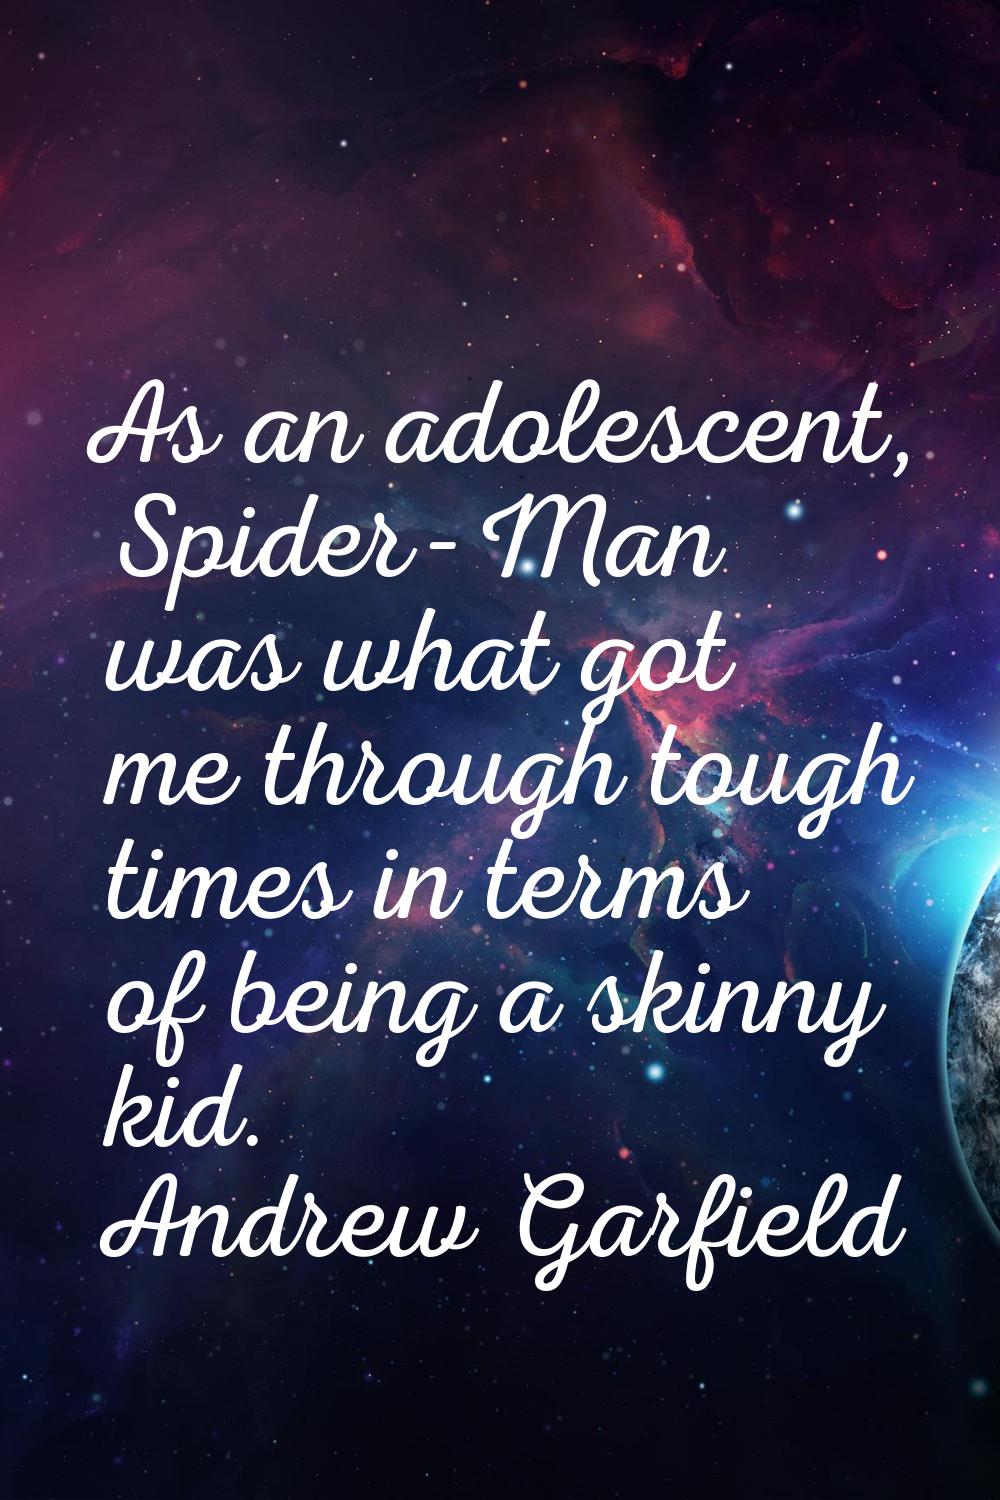 As an adolescent, Spider-Man was what got me through tough times in terms of being a skinny kid.